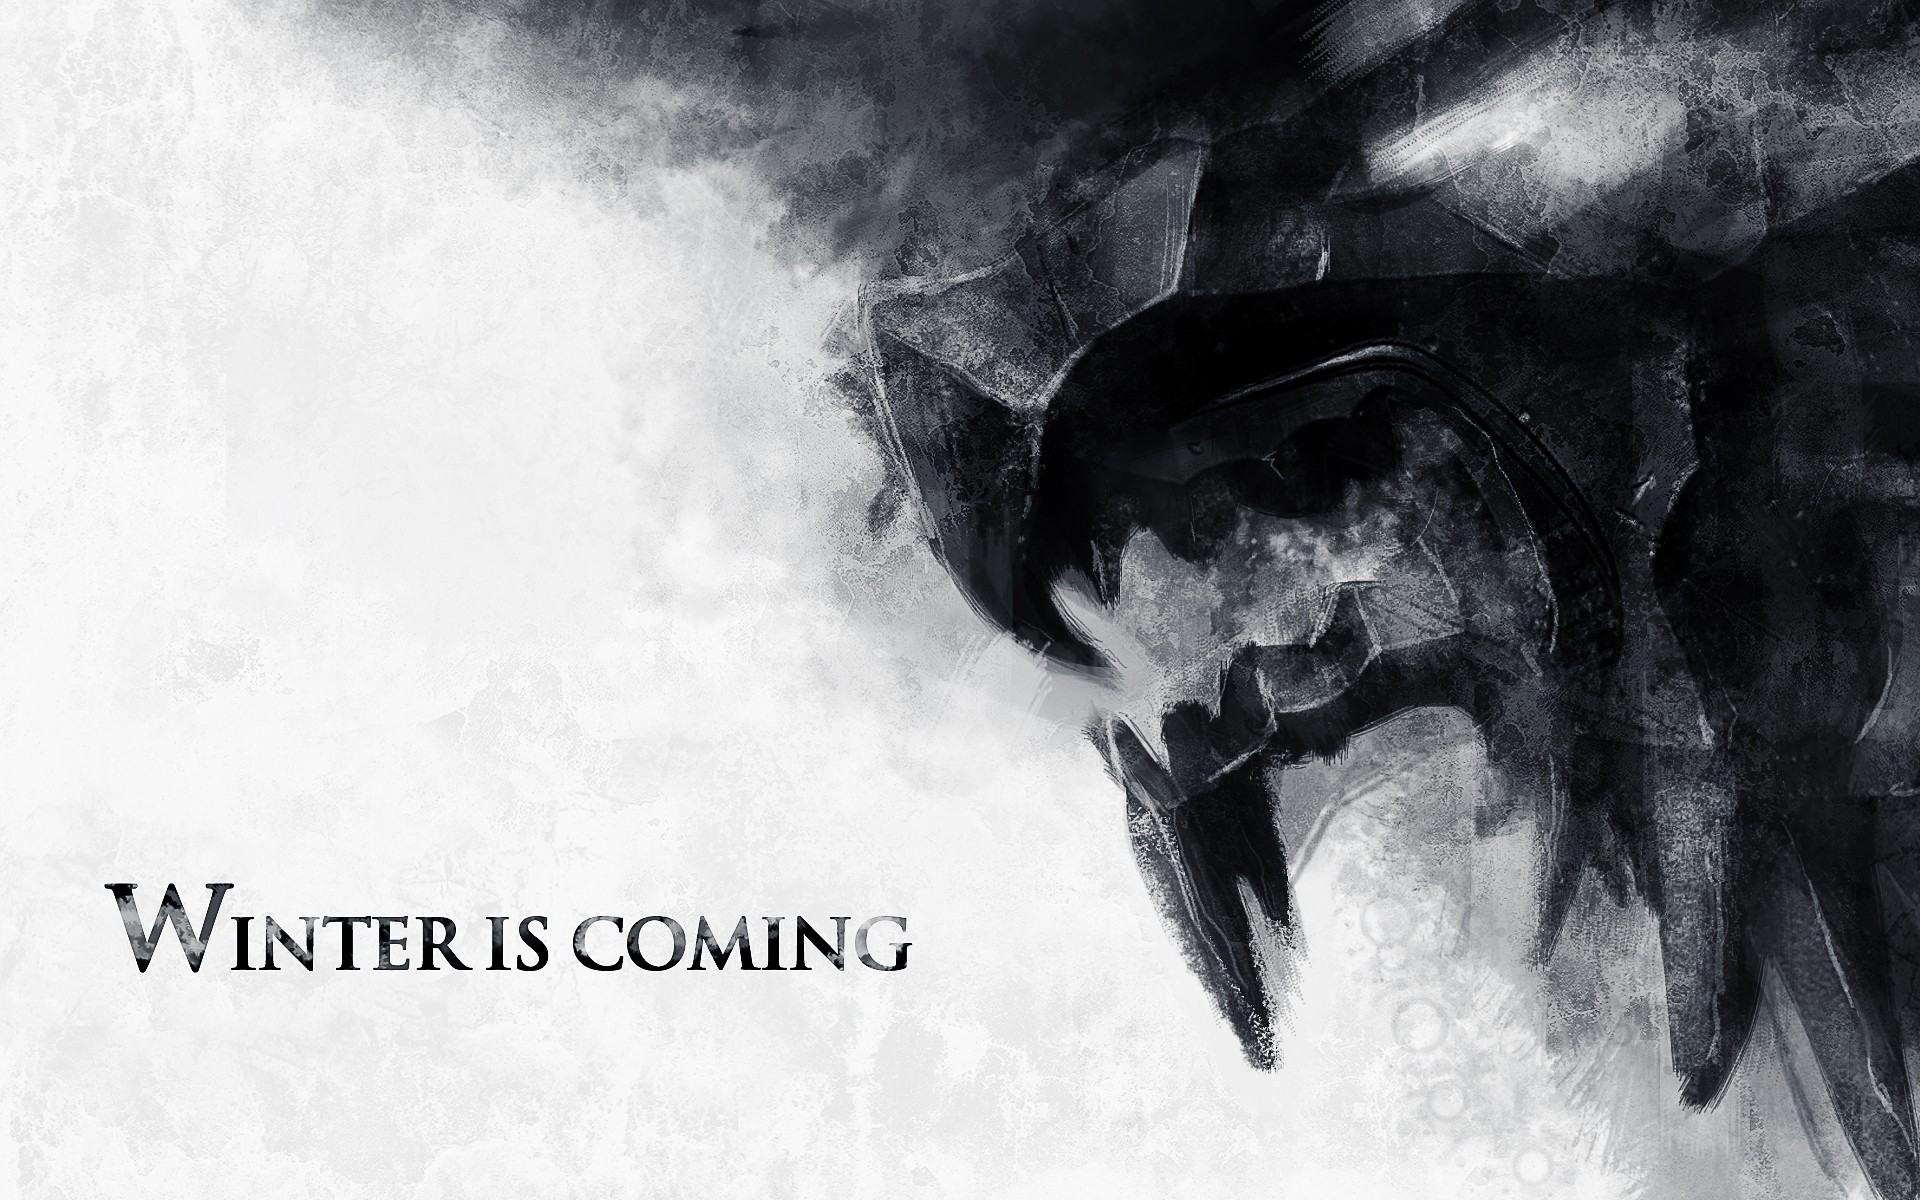 General 1920x1200 Game of Thrones Direwolf Winter Is Coming TV series HBO text digital art monochrome